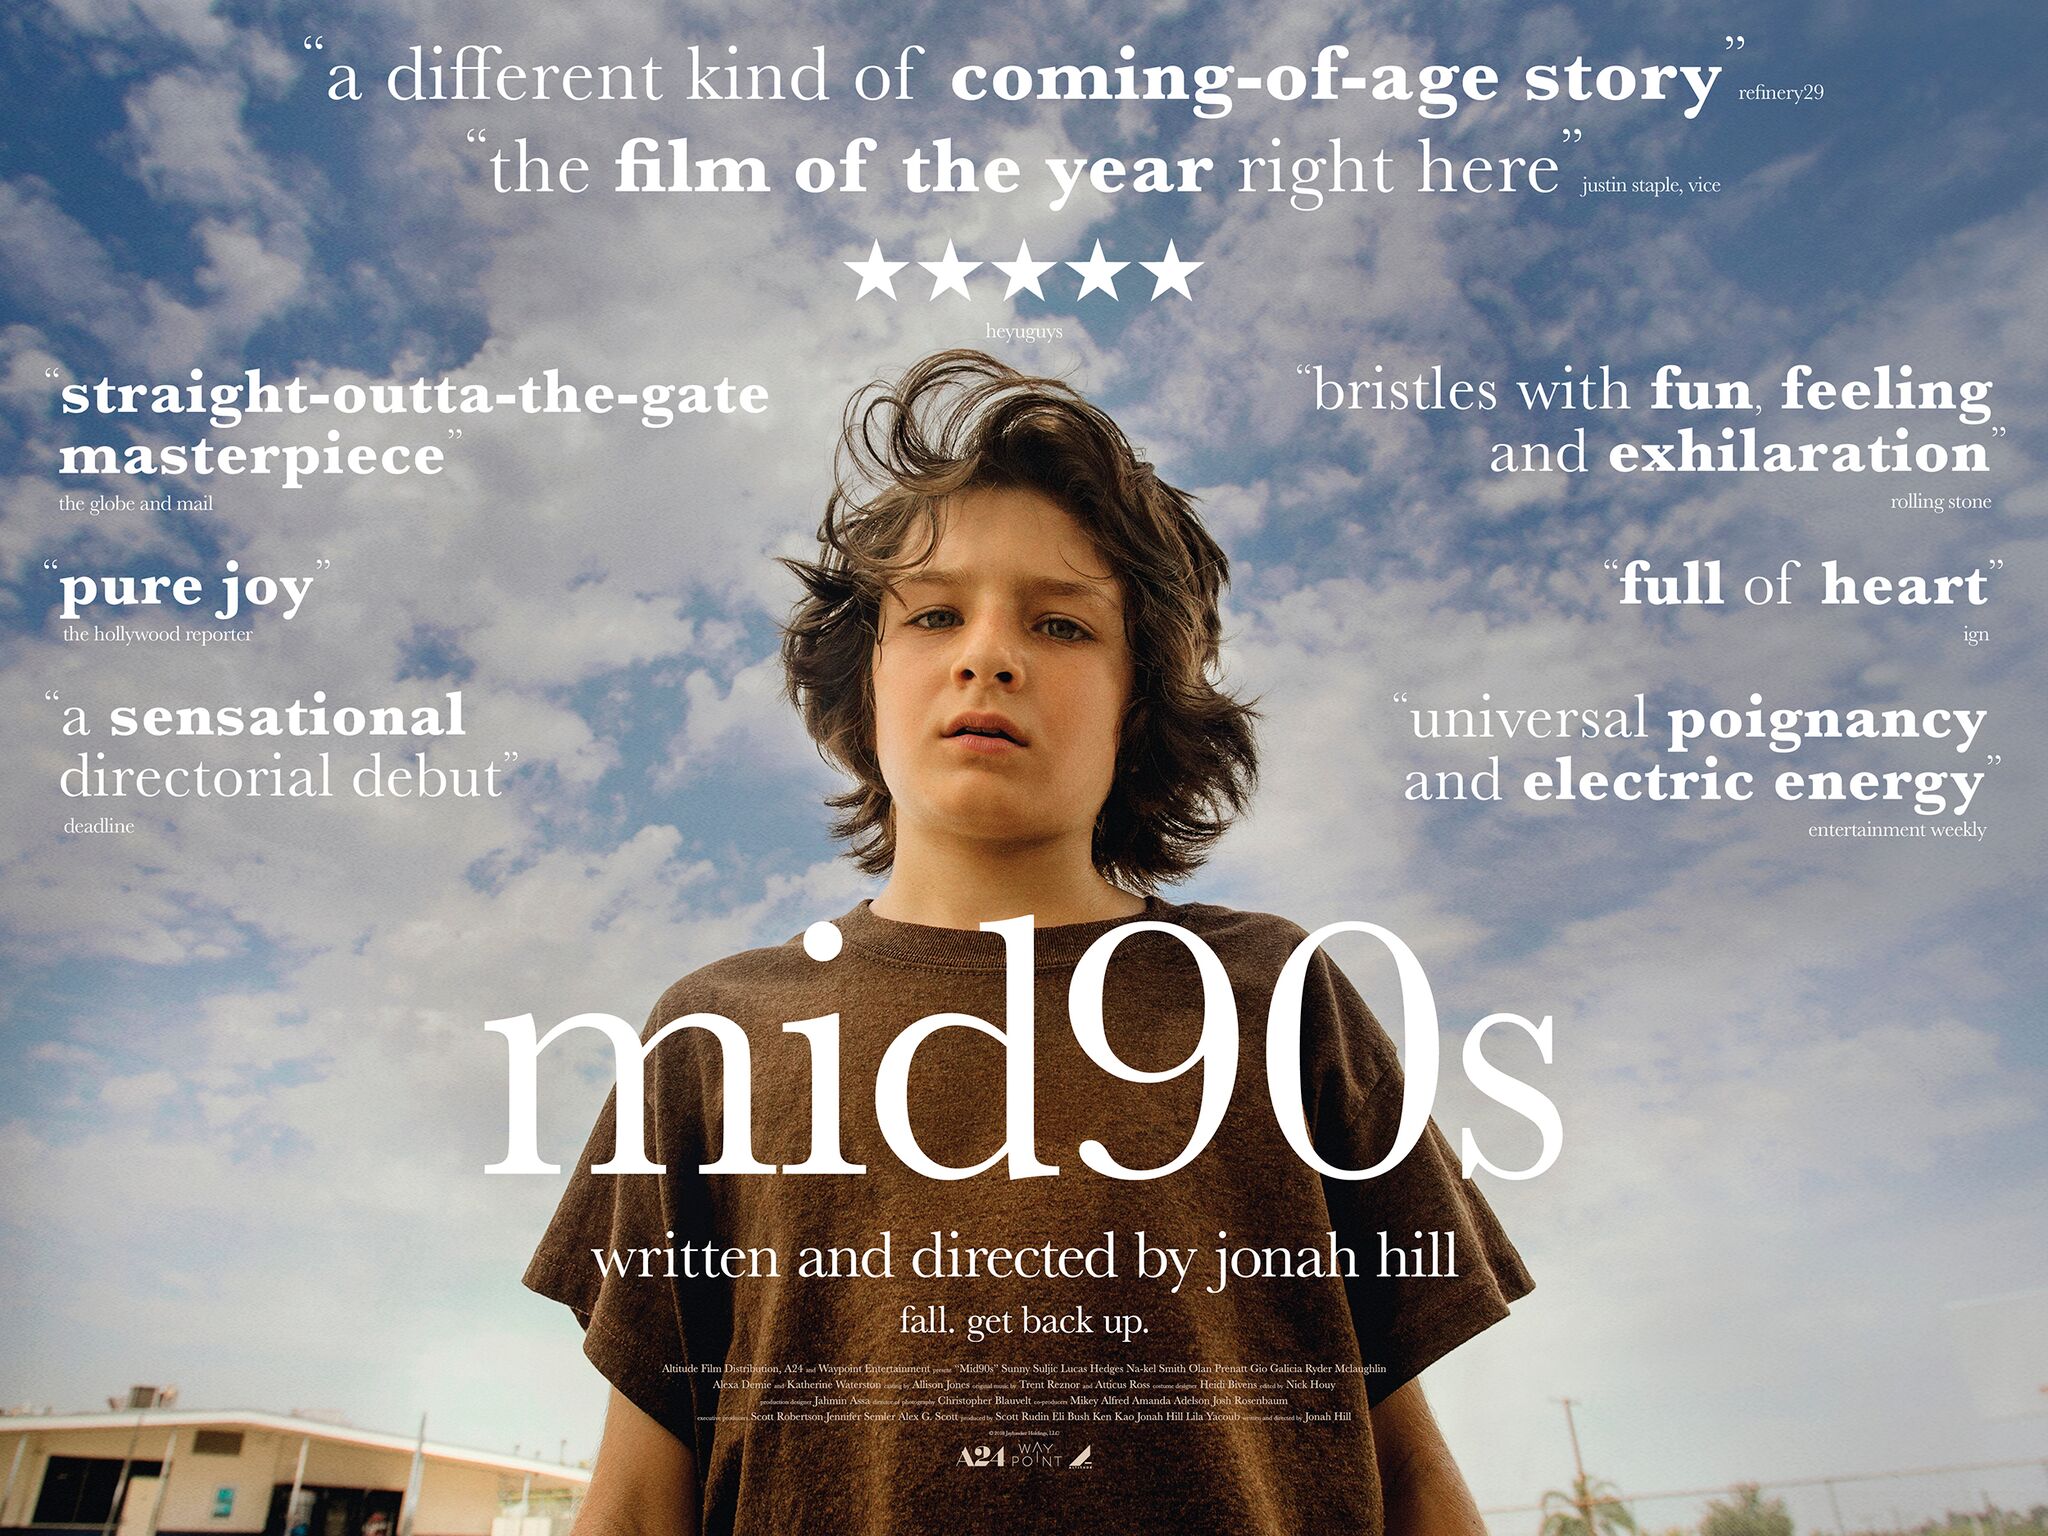 mid90s review